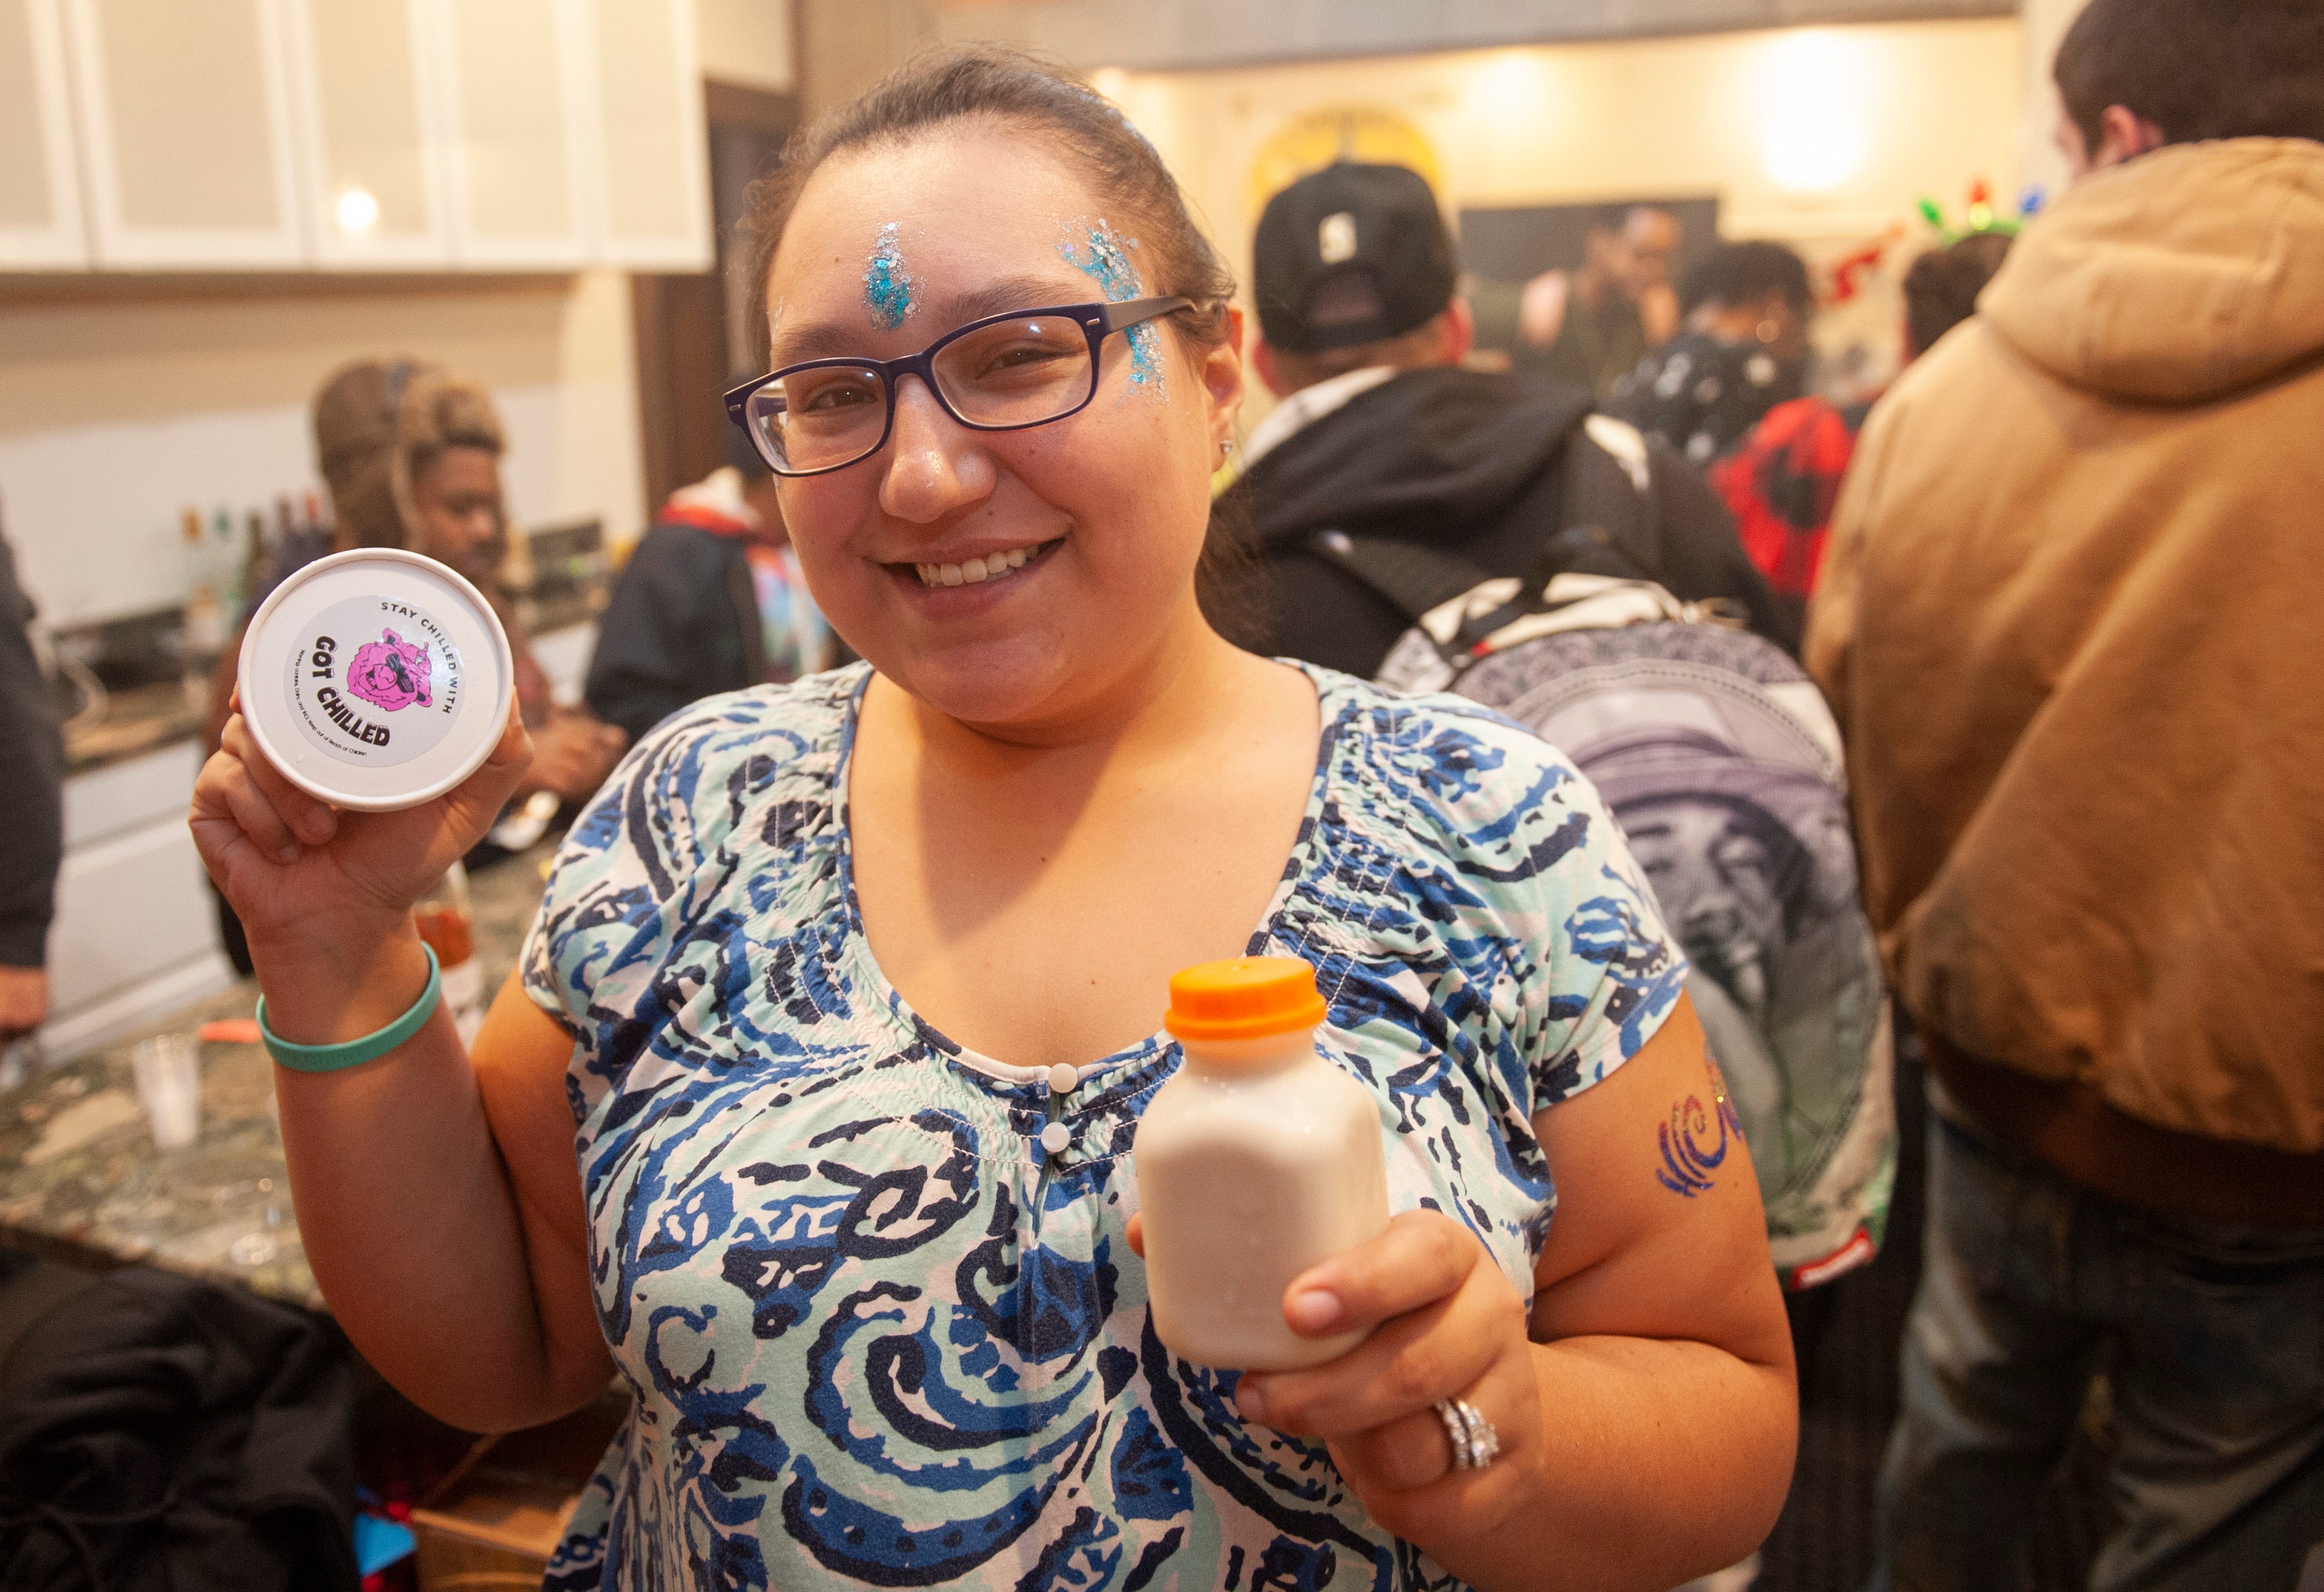 Brittany Gibler of Warren shows off her "Got Chilled" cannabis-infused dairy products, which include ice cream, sorbet and coffee creamers, during "The Art of Cannabis" tasting and art exhibition at the Cannabis Counsel in Detroit on Saturday, Dec. 22, 2018. Guests, who were required to be Michigan residents age 21 or older or medical marijuana card holders, bought a ticket to the event, but once inside there were free samples of edibles and smokeables.